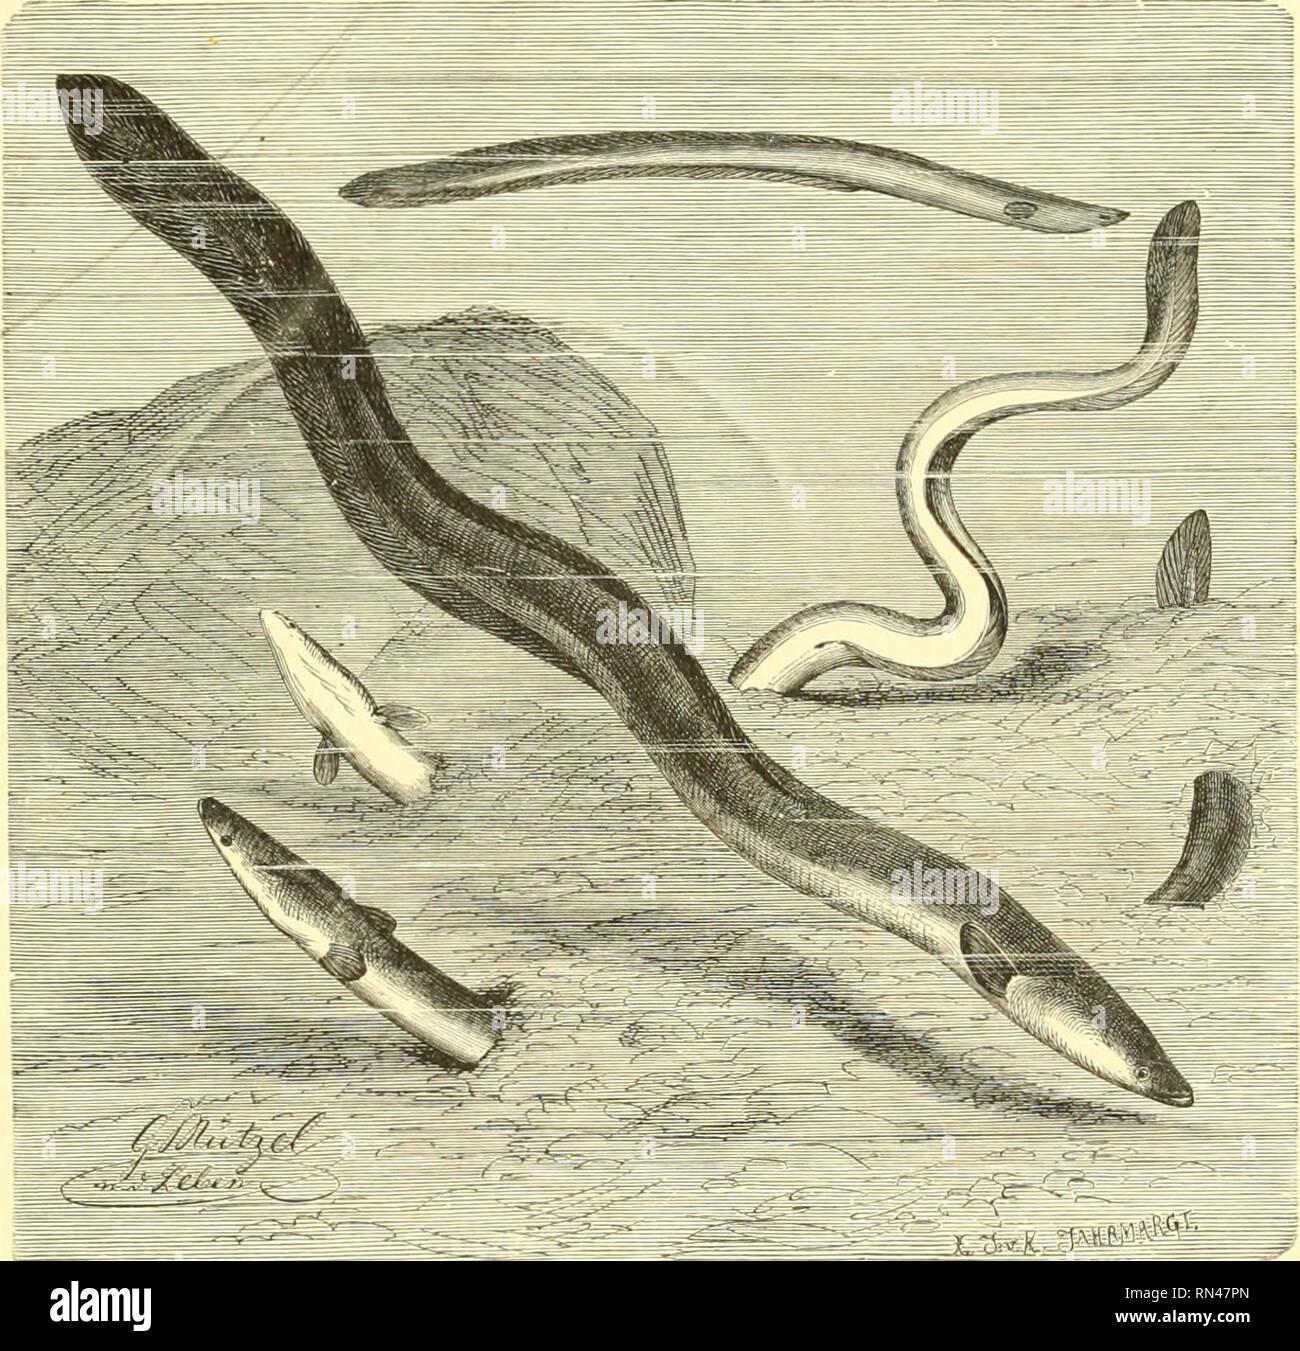 . Animate creation : popular edition of &quot;Our living world&quot; : a natural history. Zoology; Zoology. THE SAND EEL. 271 While resident on the Florida Reef, at Fort Jefferson, we discovered a Fierasfer living in a large Holothuria. At this time, 1859, this was a novelty to naturalists. Since then species have been found in other parts of the world, and in various objects. The large Holothuria, or Sea Cucumber of the Reef, is often eighteen inches in length; and it is abundantly spread over the reef in shoal water. The visitor, in saOing leisurely in these waters, may reach one easily fi'o Stock Photo